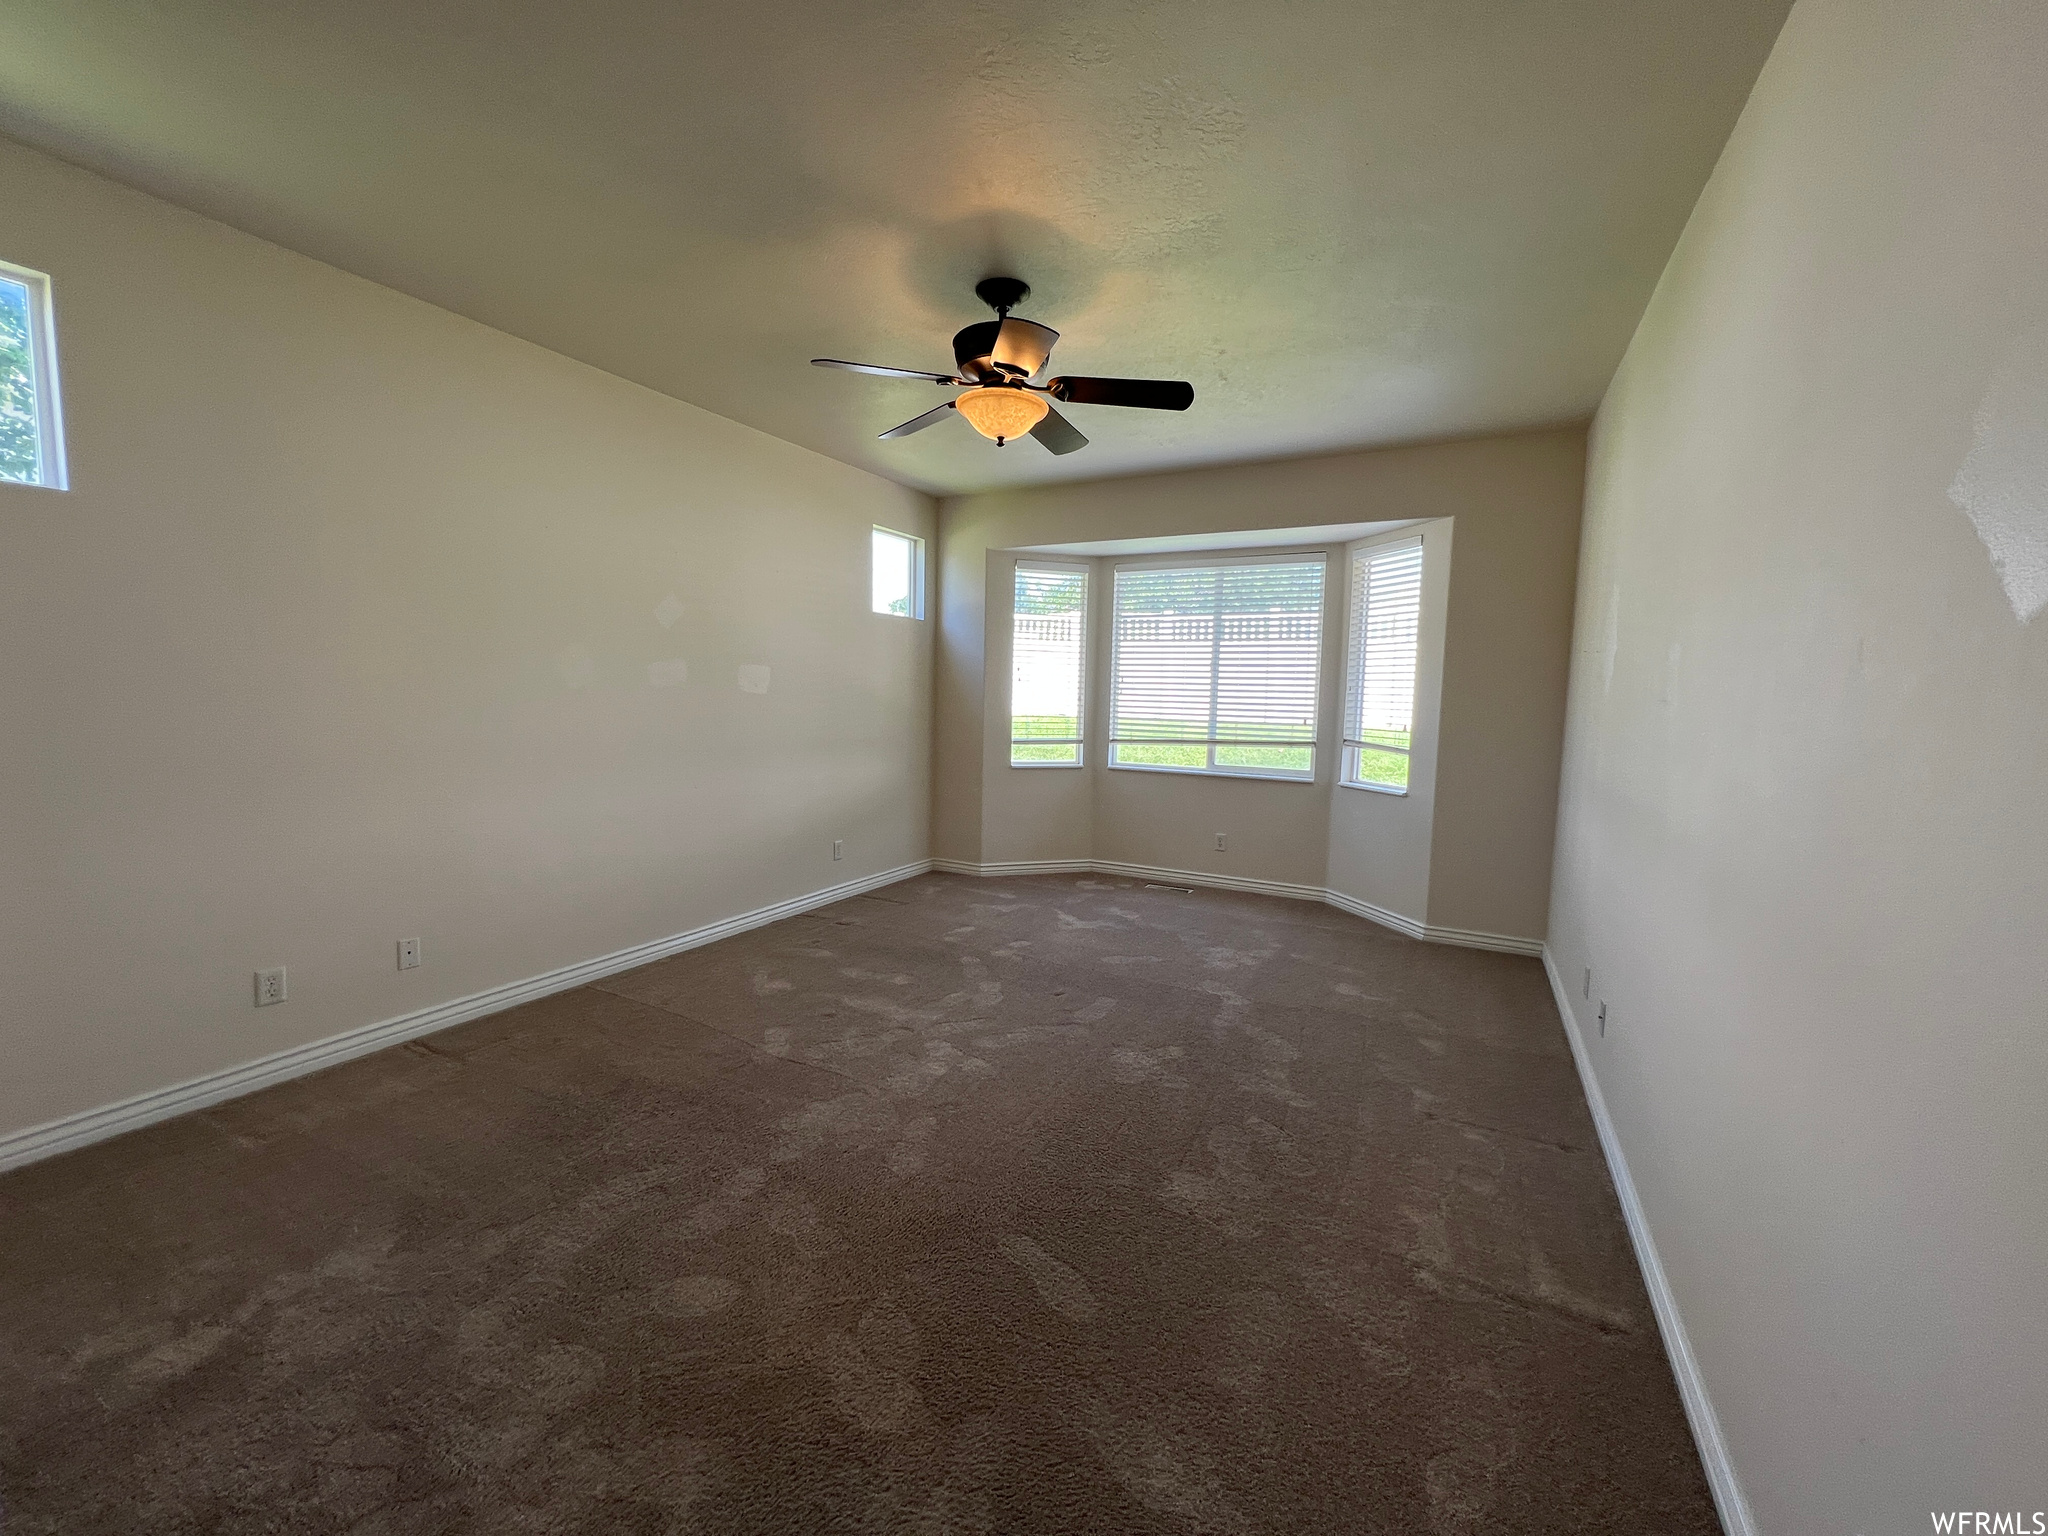 Unfurnished room with dark carpet and ceiling fan